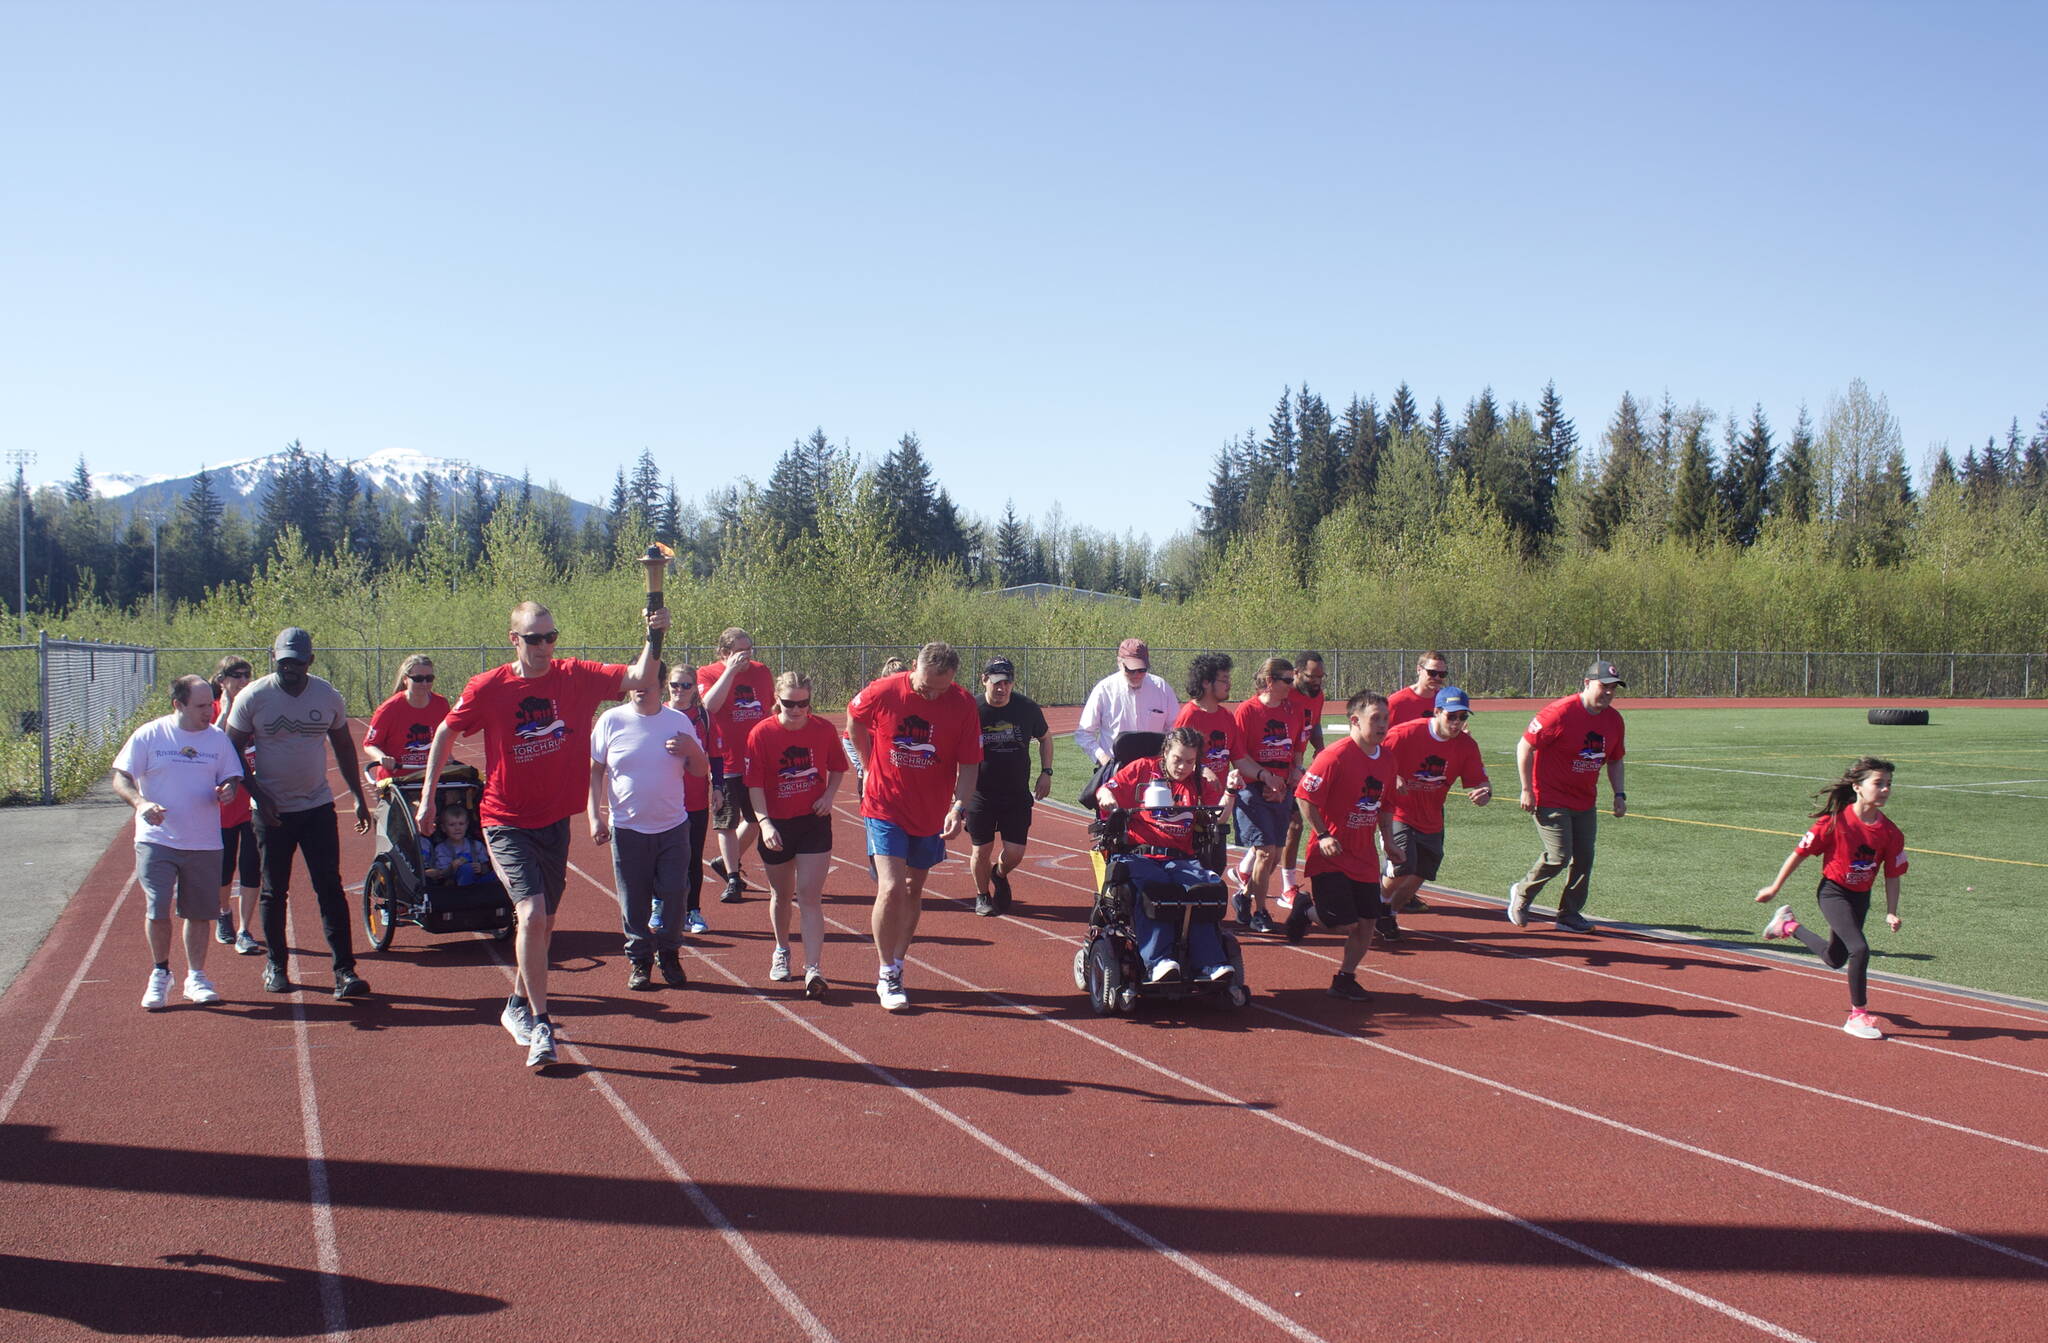 About 30 participants dash out from the starting line at the Alaska Law Enforcement Torch Run at Thunder Mountain High School on Saturday morning. Participants opted for either a two-mile or 5K course, including a start and finish lap around the school’s track. (Mark Sabbatini / Juneau)